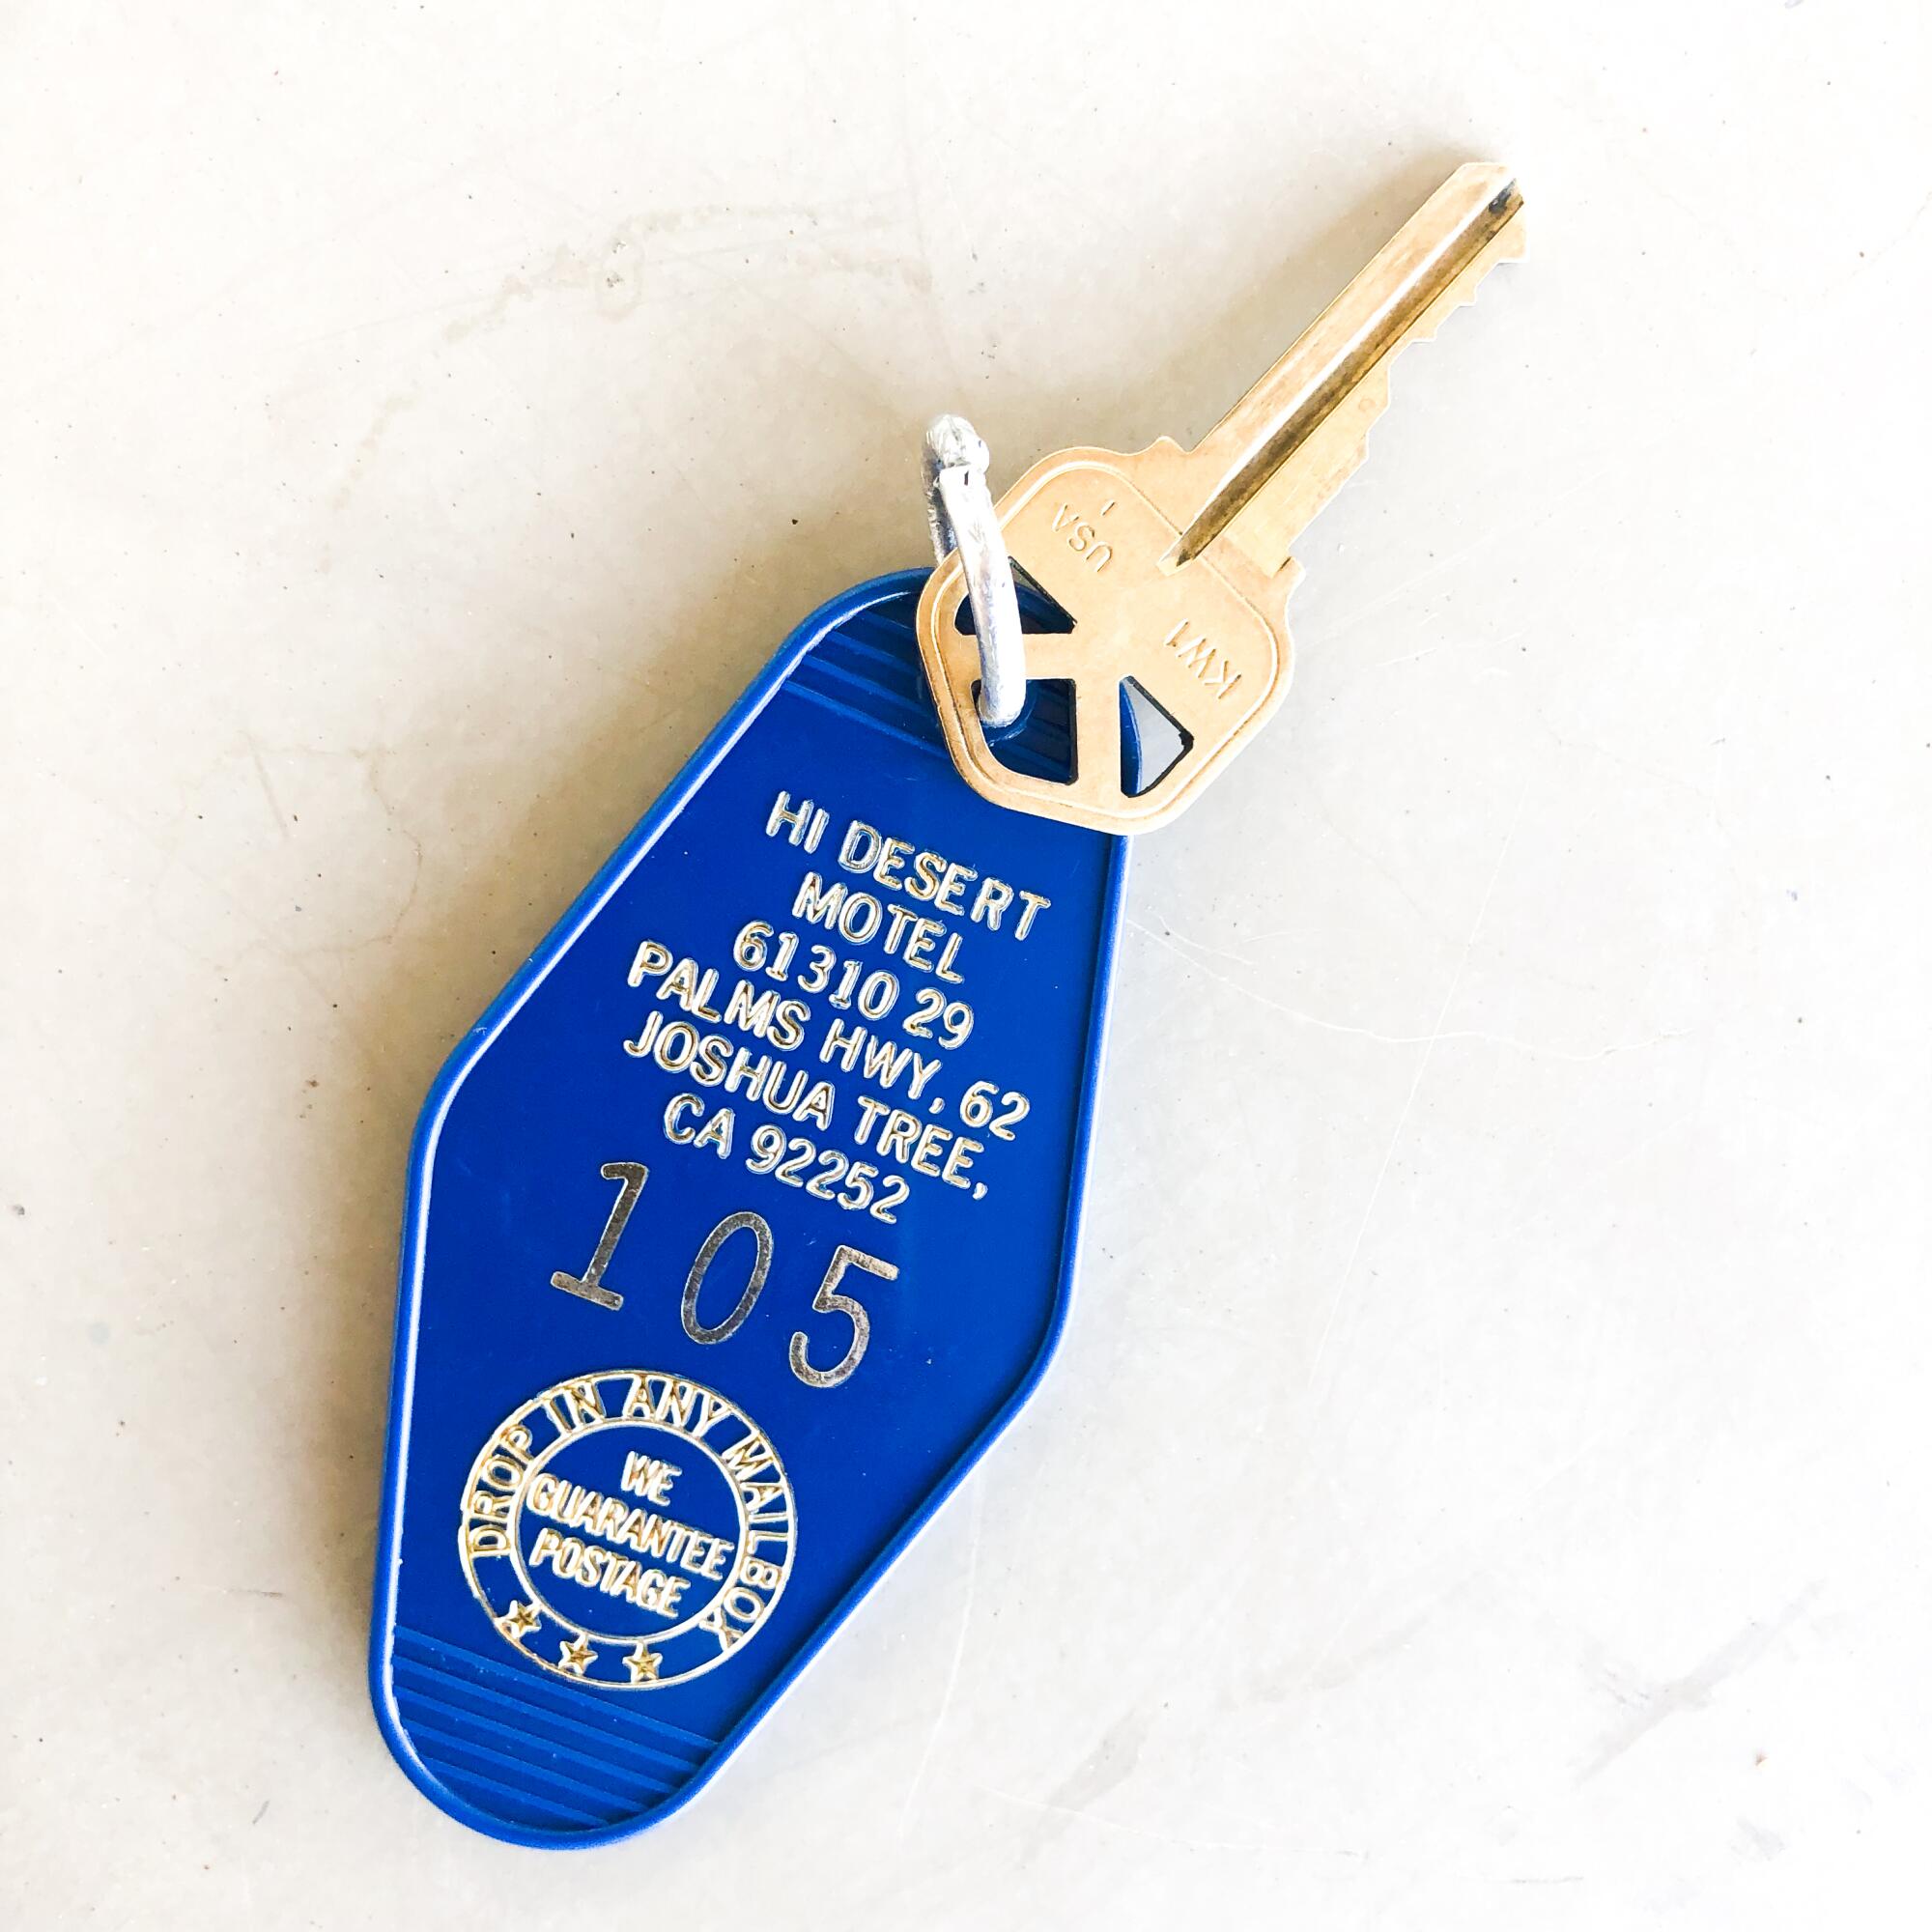 A key linked to a keychain with a tag for Hi Desert Motel